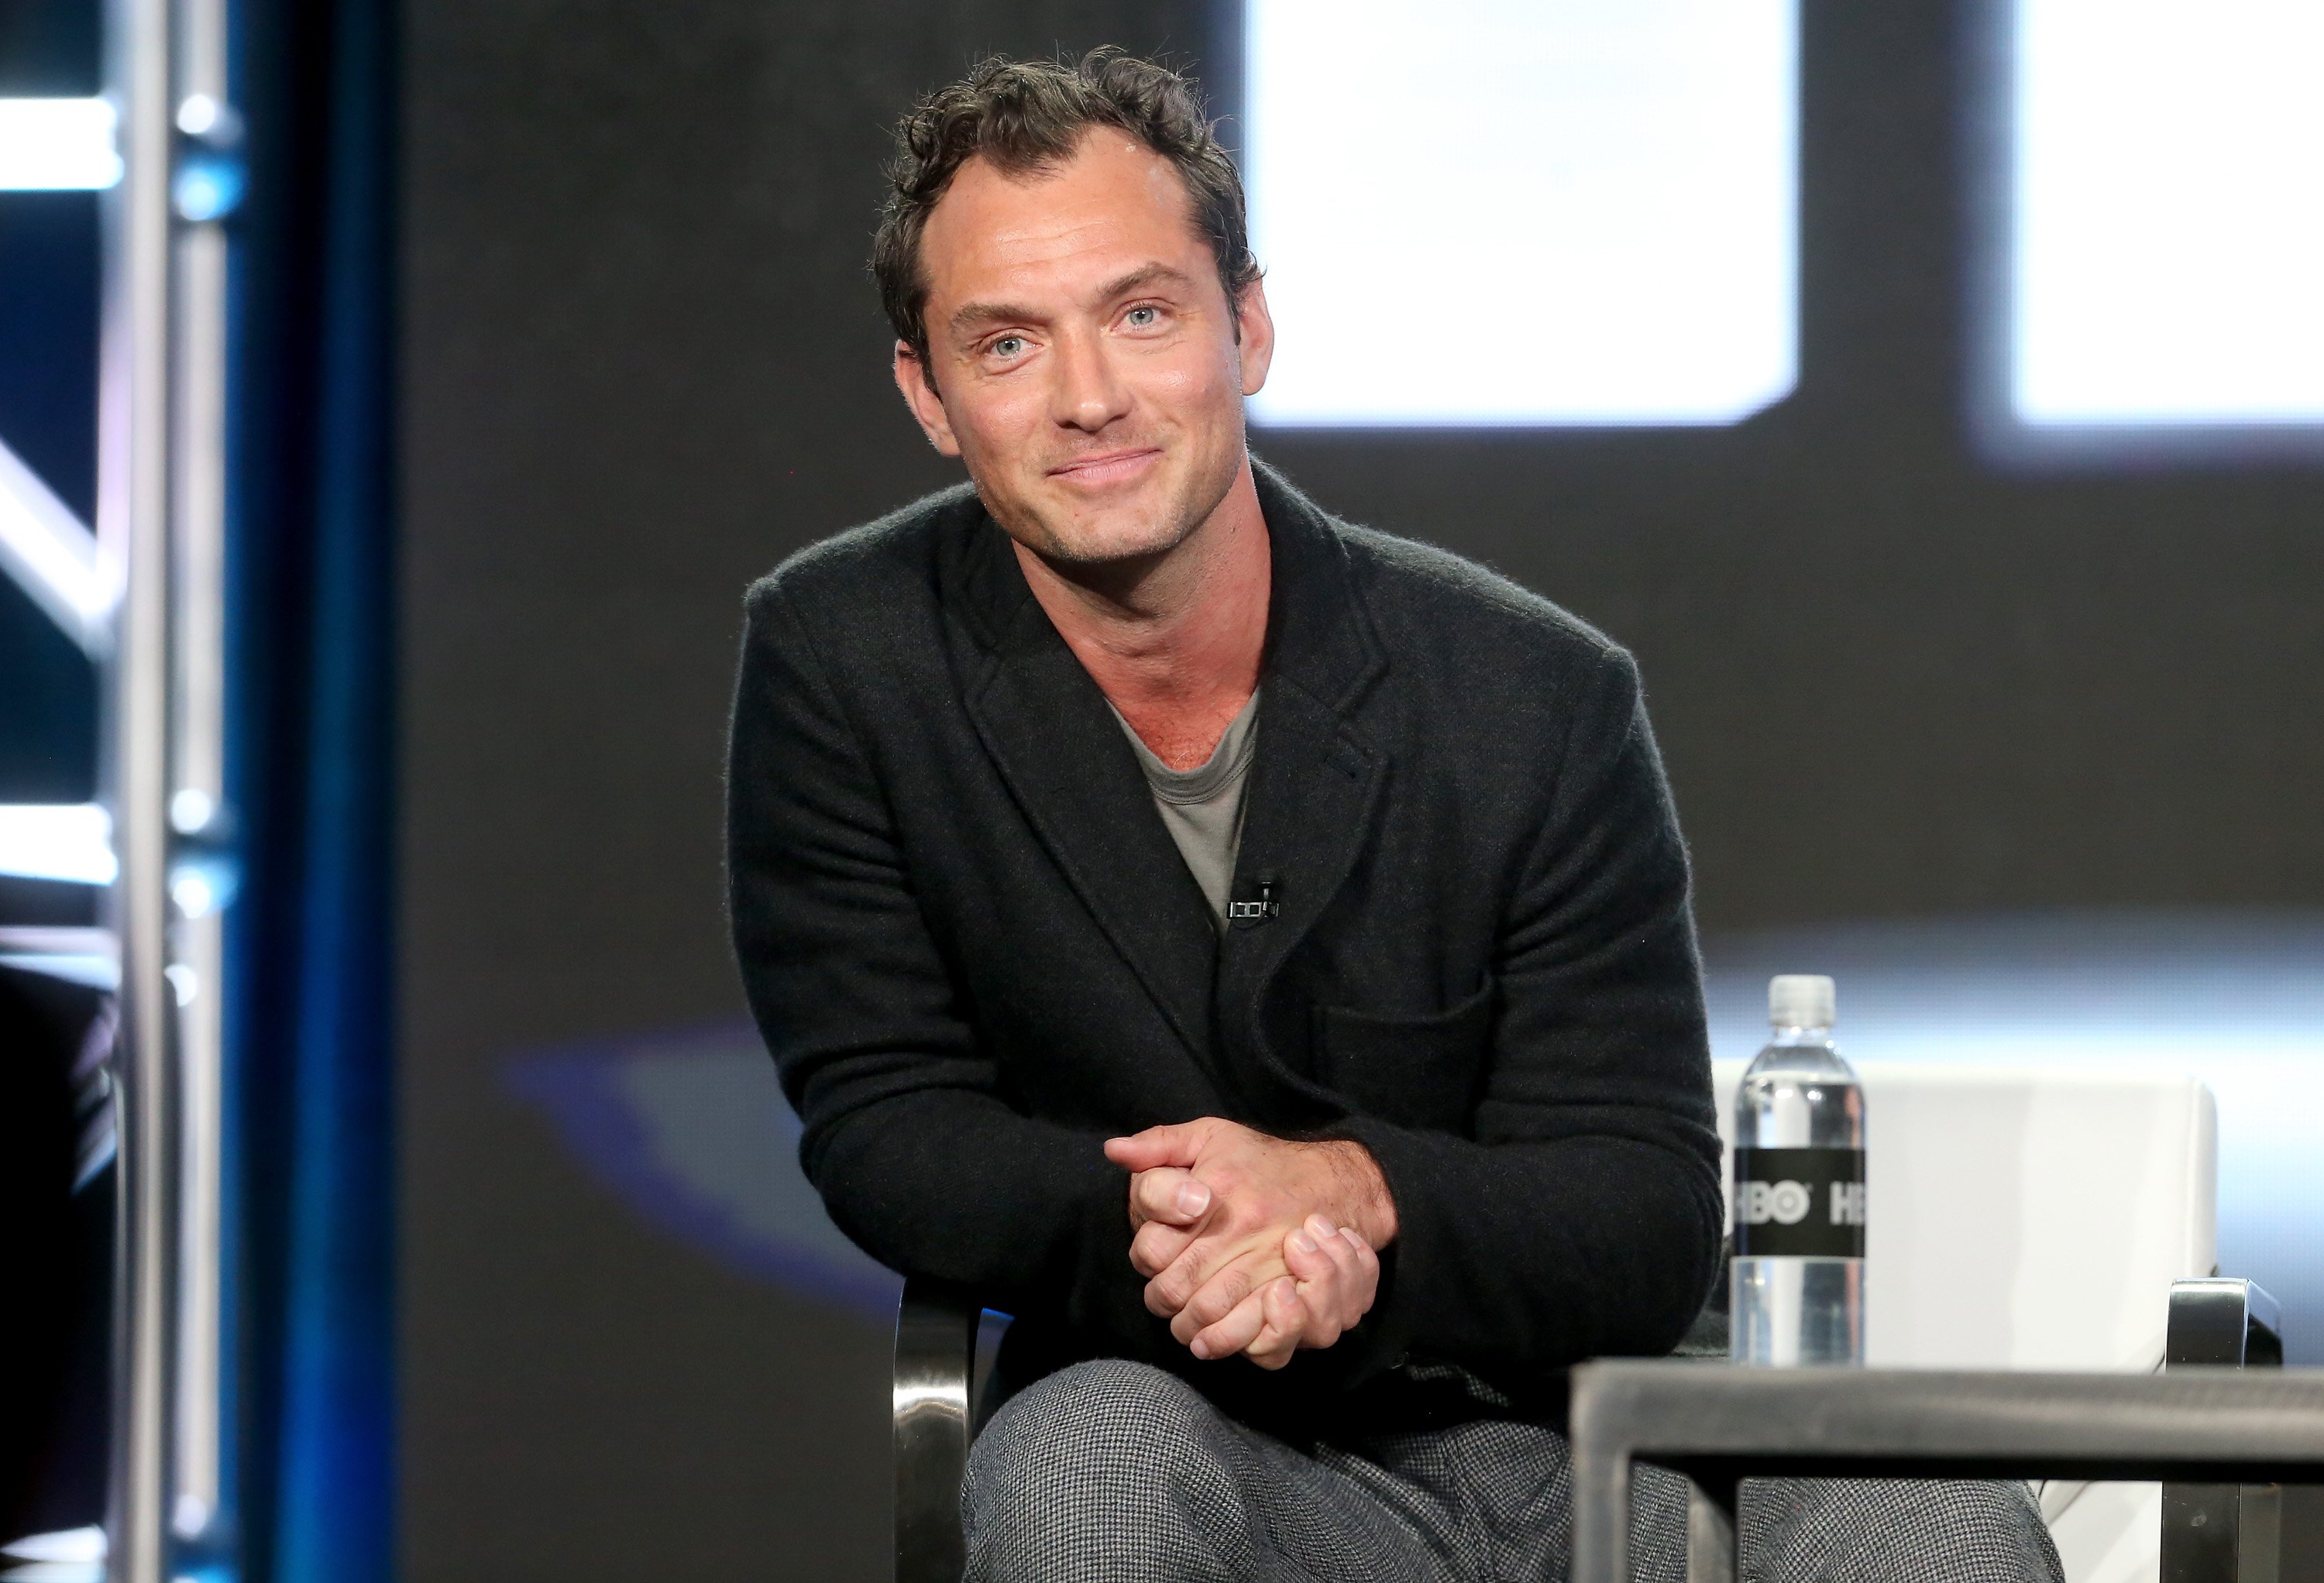 Jude Law of the series 'The Young Pope' speaks onstage during the HBO portion of the 2017 Winter Television Critics Association Press Tour at the Langham Hotel on January 14, 2017 in Pasadena